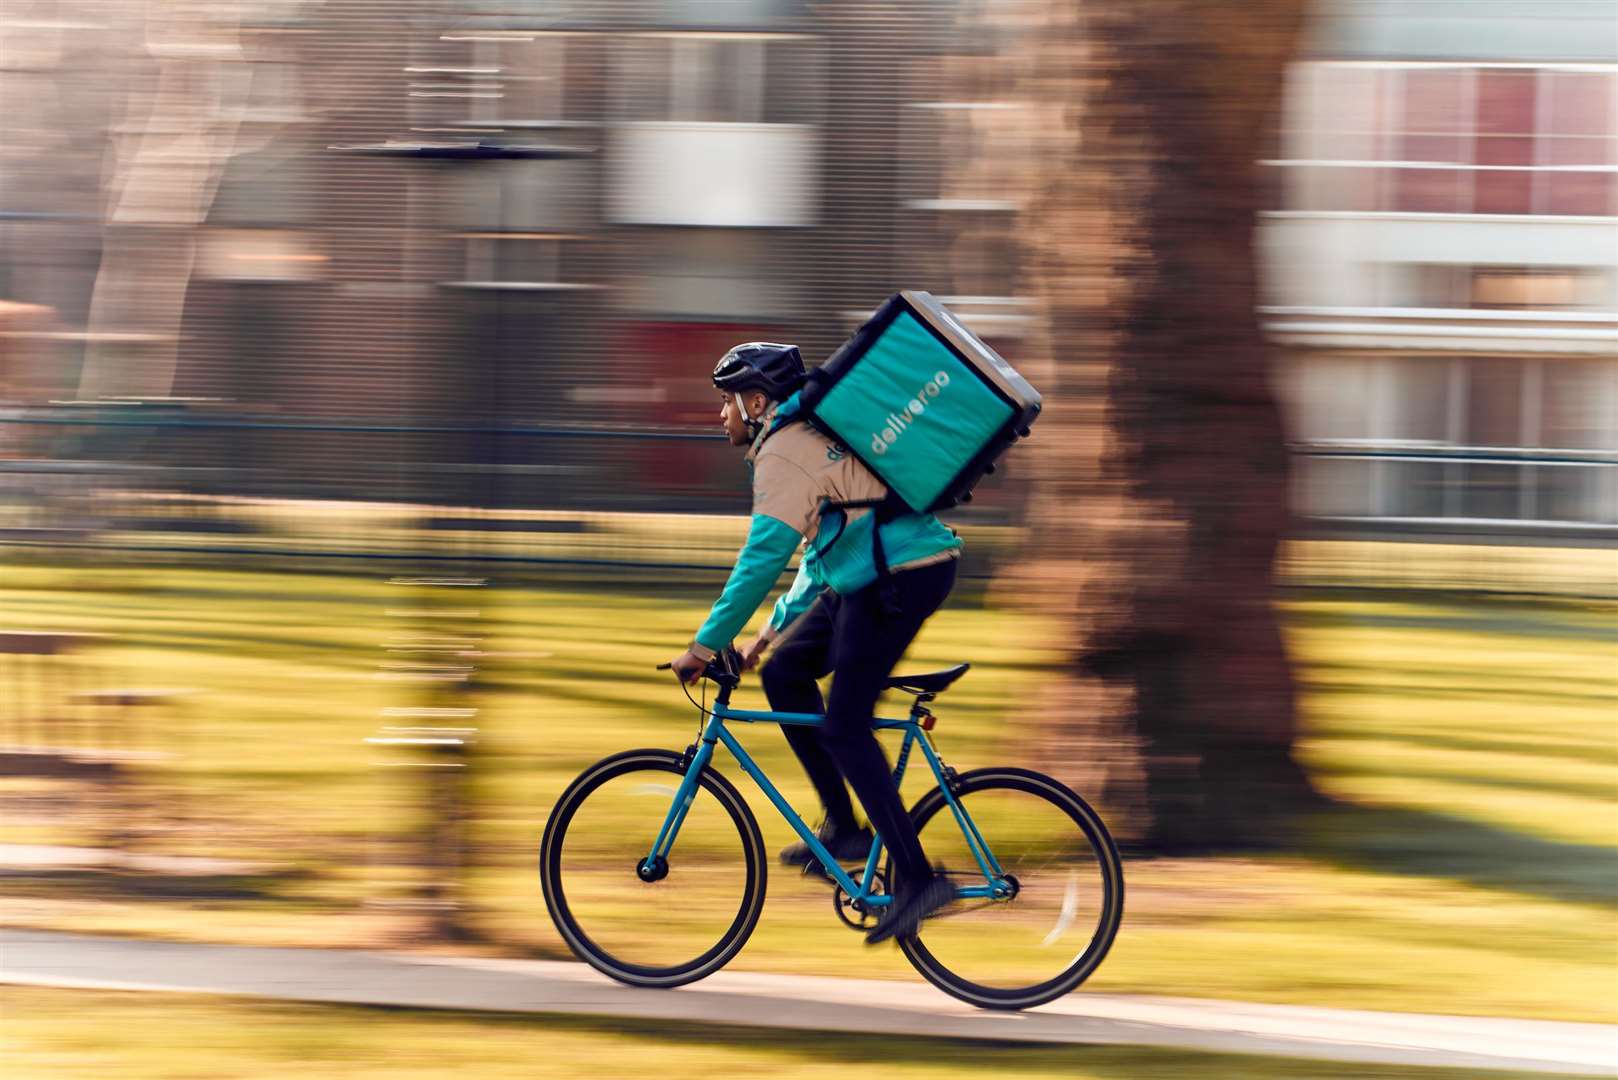 Deliveroo employees take food to people.